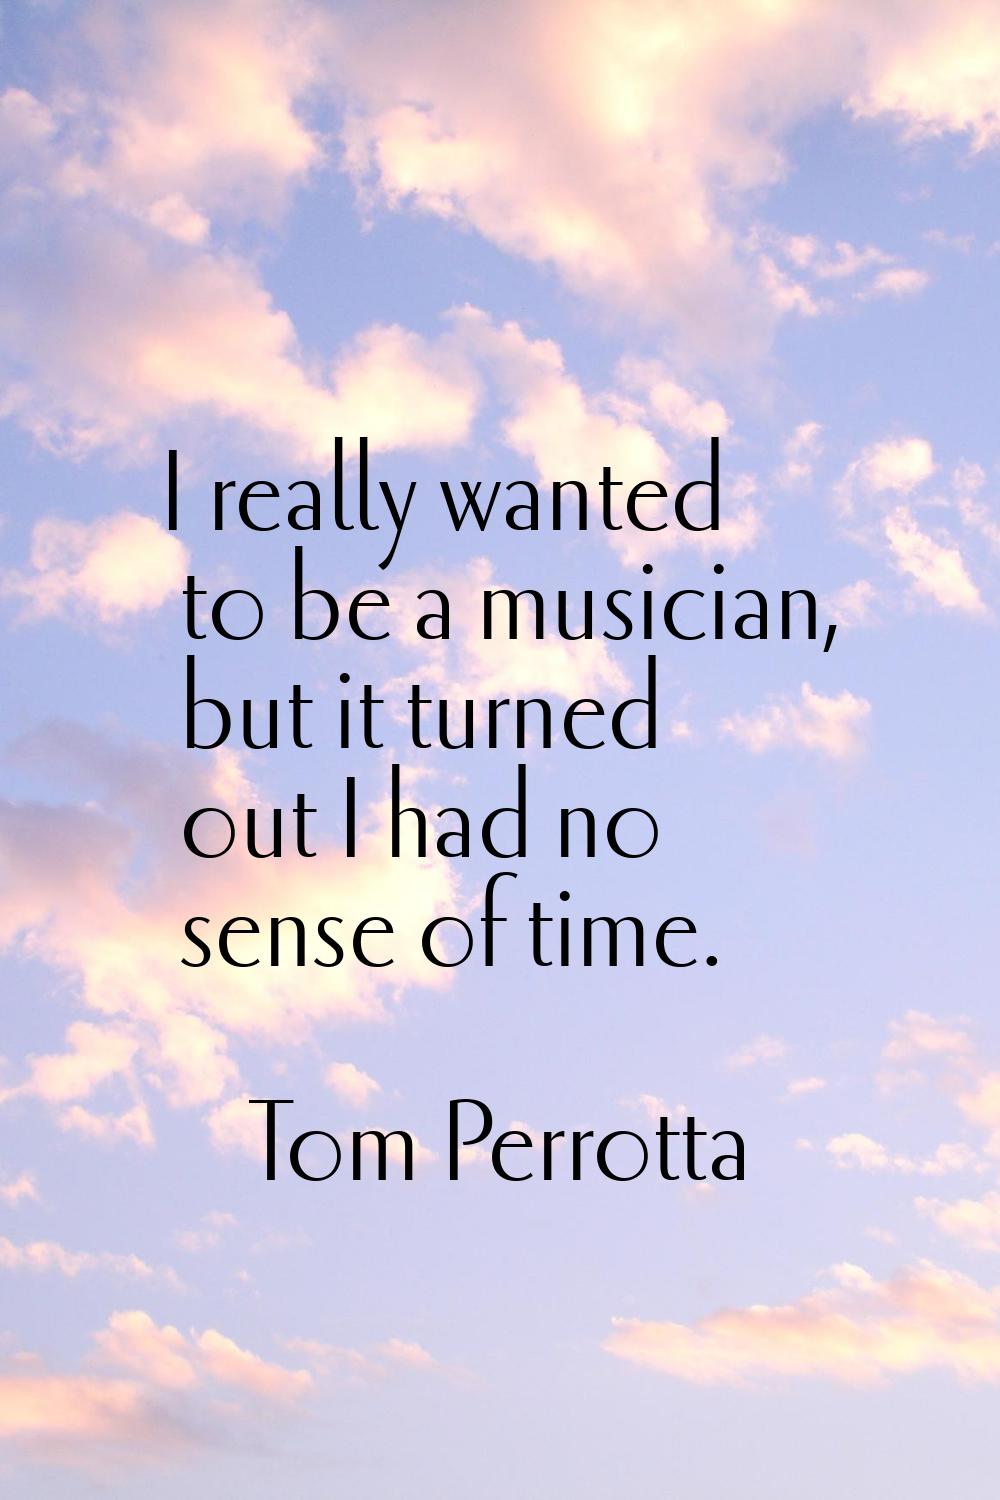 I really wanted to be a musician, but it turned out I had no sense of time.